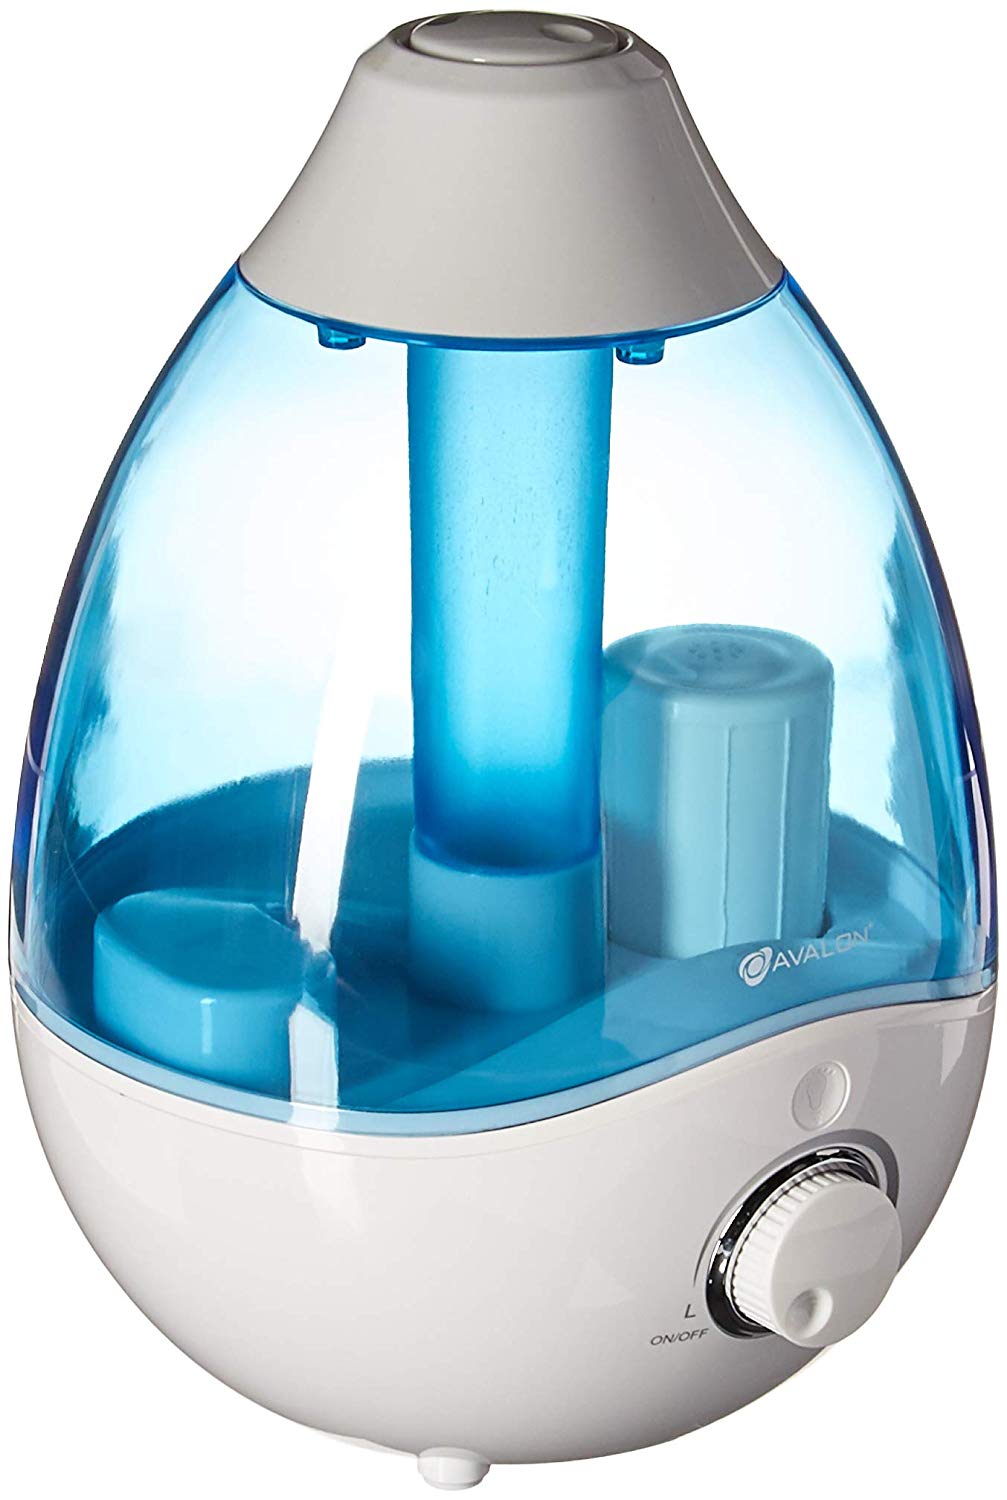 Premium Cool Mist Humidifier with Aromatherapy Essential Oil Drop Diffuser $21.95 (REG $39.99)